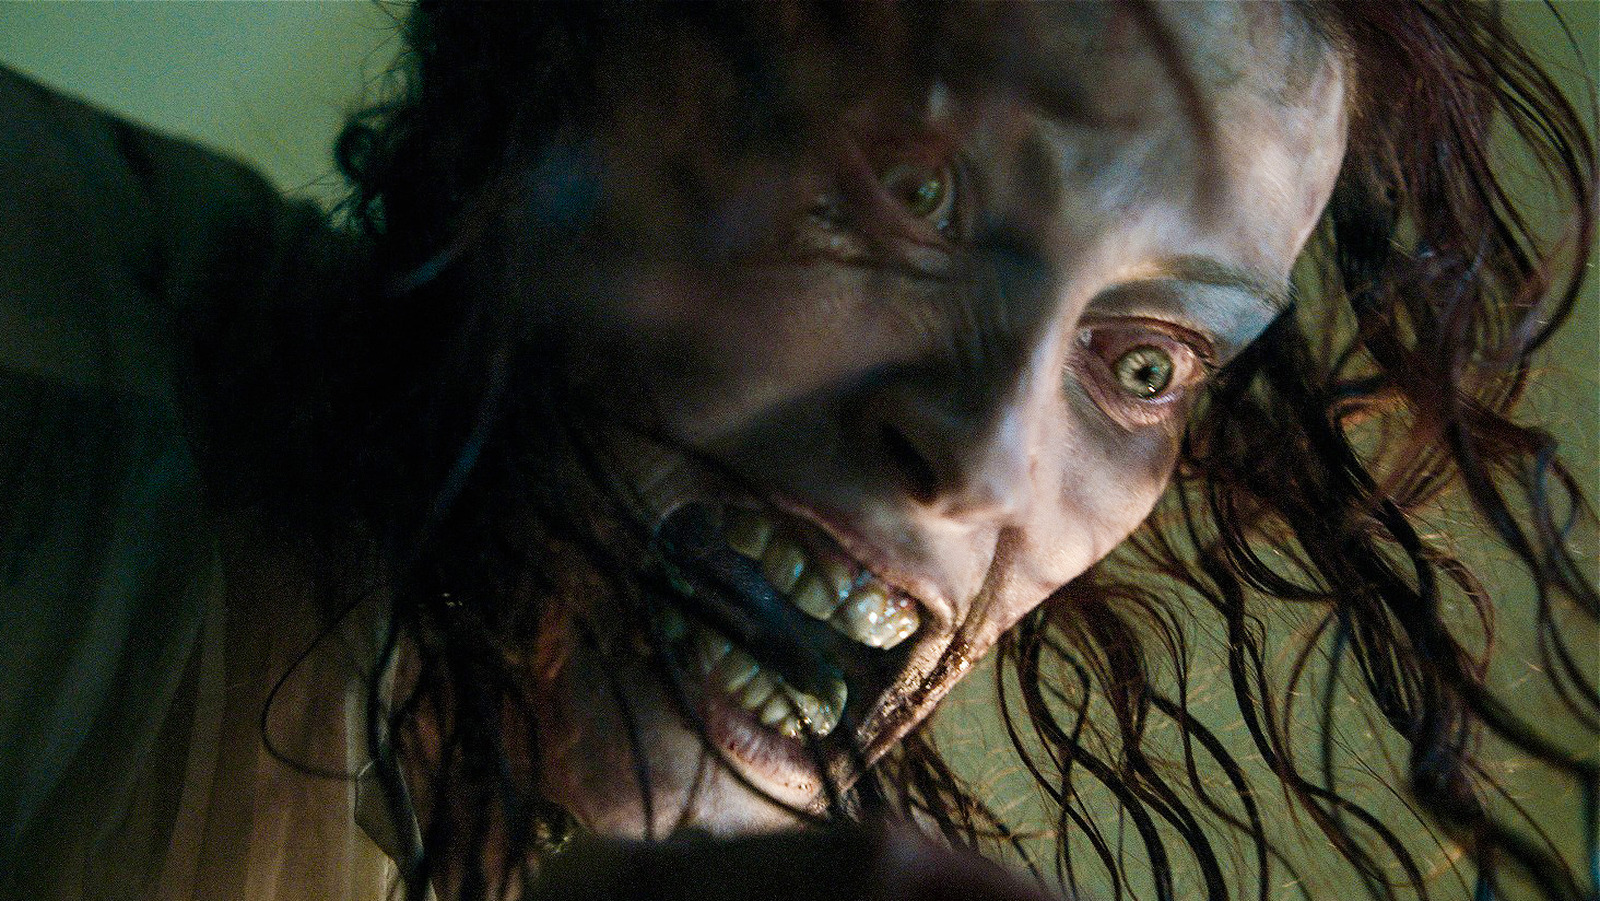 Before 'Evil Dead Rise,' Here's a Brief History of the Evil Dead Franchise